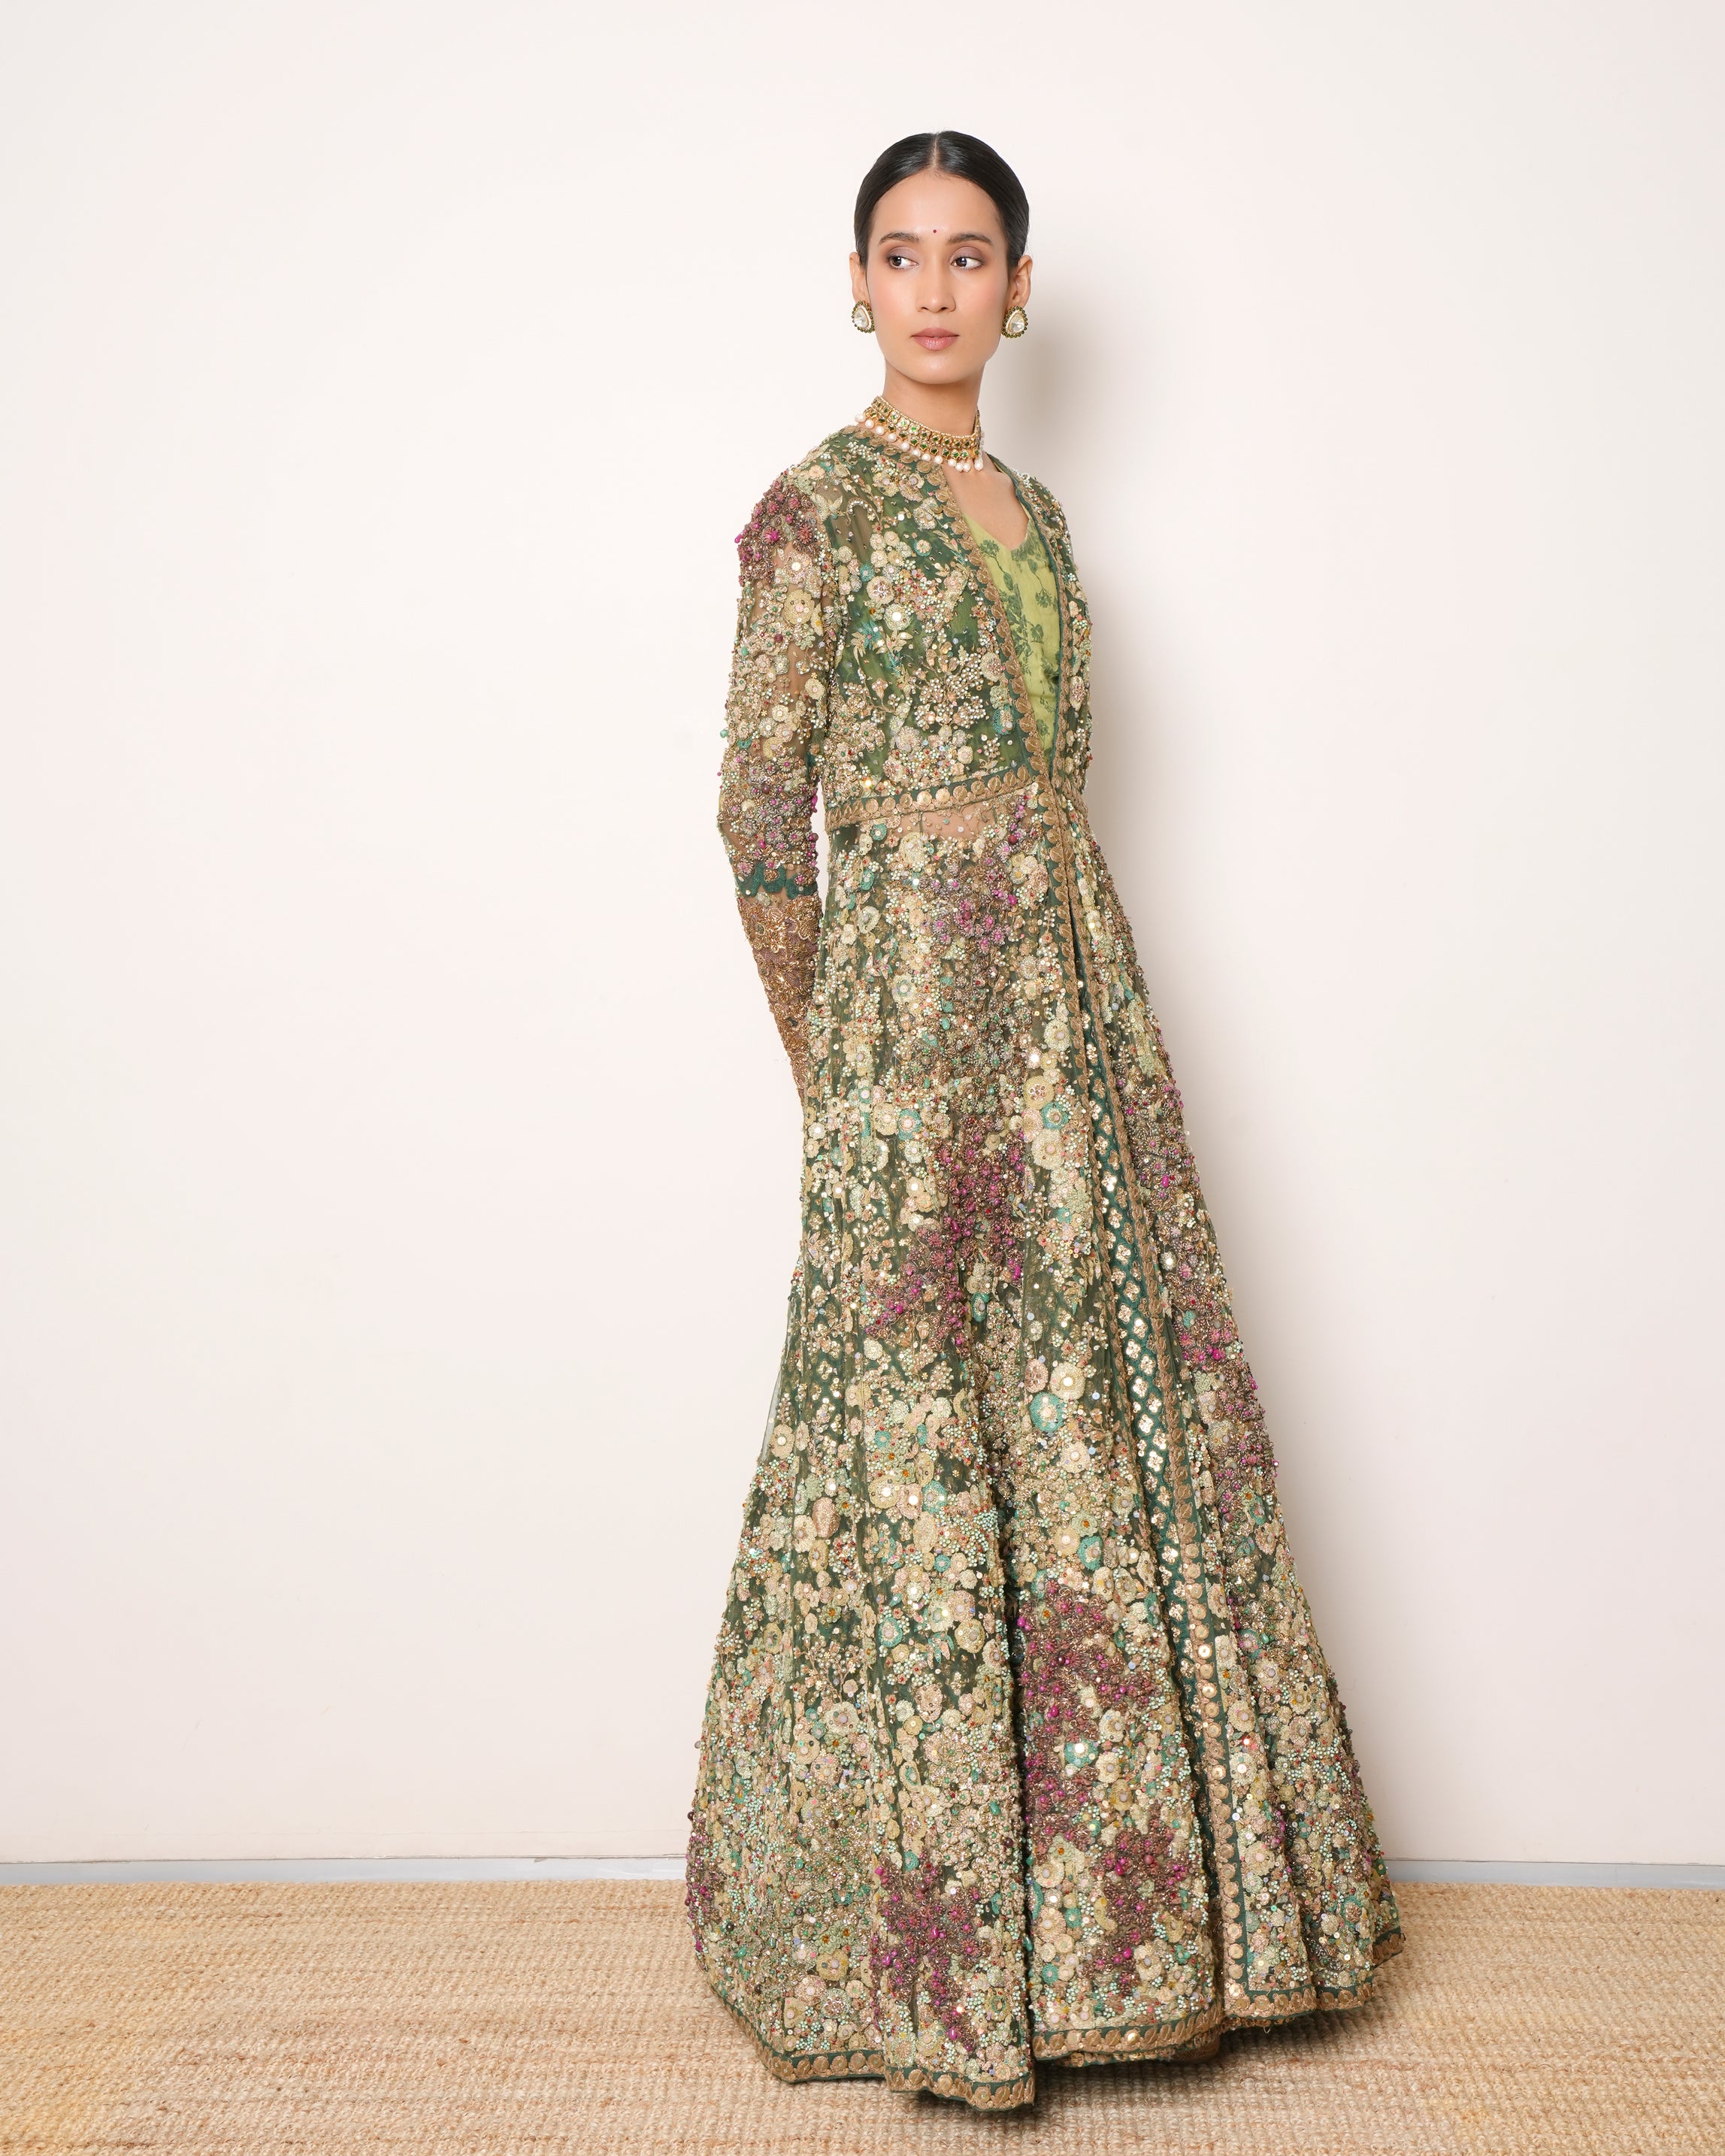 Sabyasachi - The Sabyasachi 2021 Collection Womenswear, jewellery  @sabyasachijewelry and accessories @sabyasachiaccessories For all product  related queries, please email us at customerservice@sabyasachi.com or  contact our retail stores directly Email ...